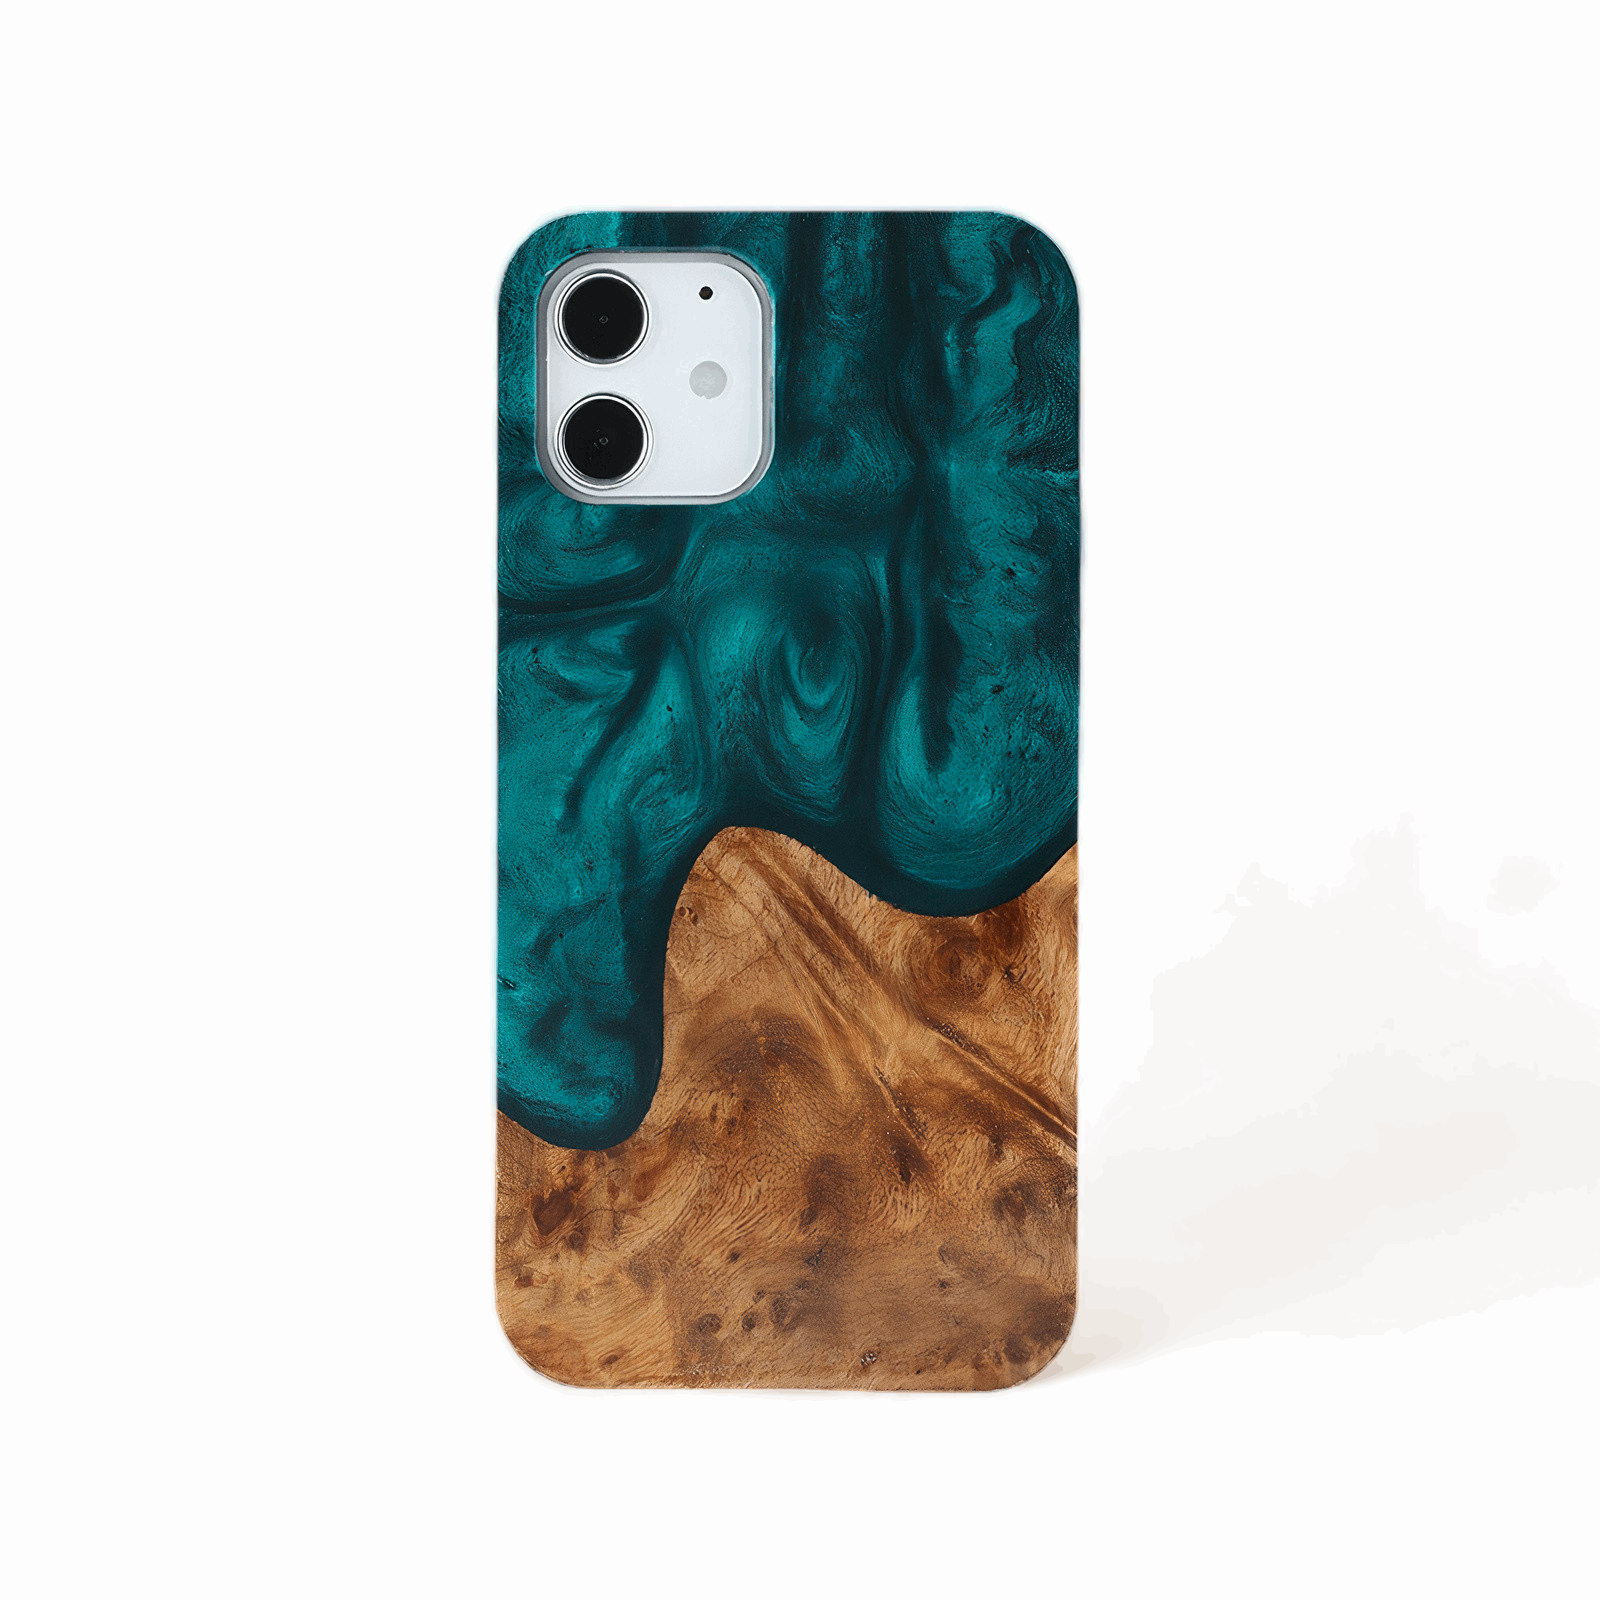 Wood and Resin iPhone Case - Malachite Green - Tallpine | Sustainable and Eco-Friendly Phone Cases - Green Wood